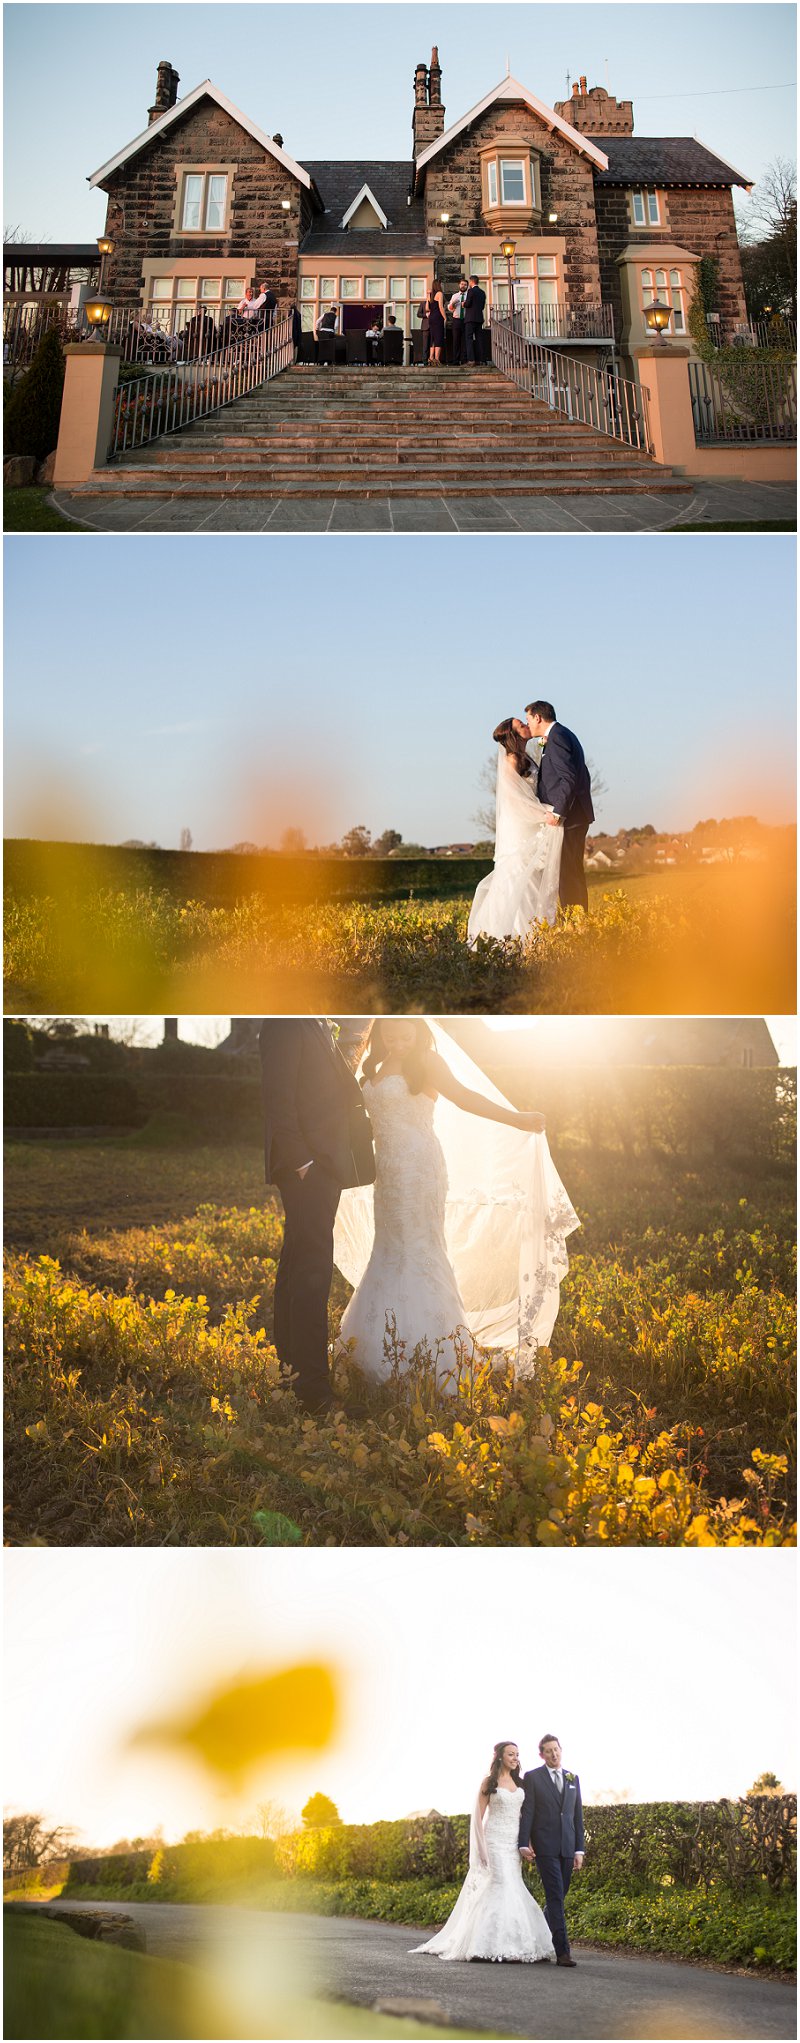 Golden hour shots of bride and groom at West Tower wedding venue